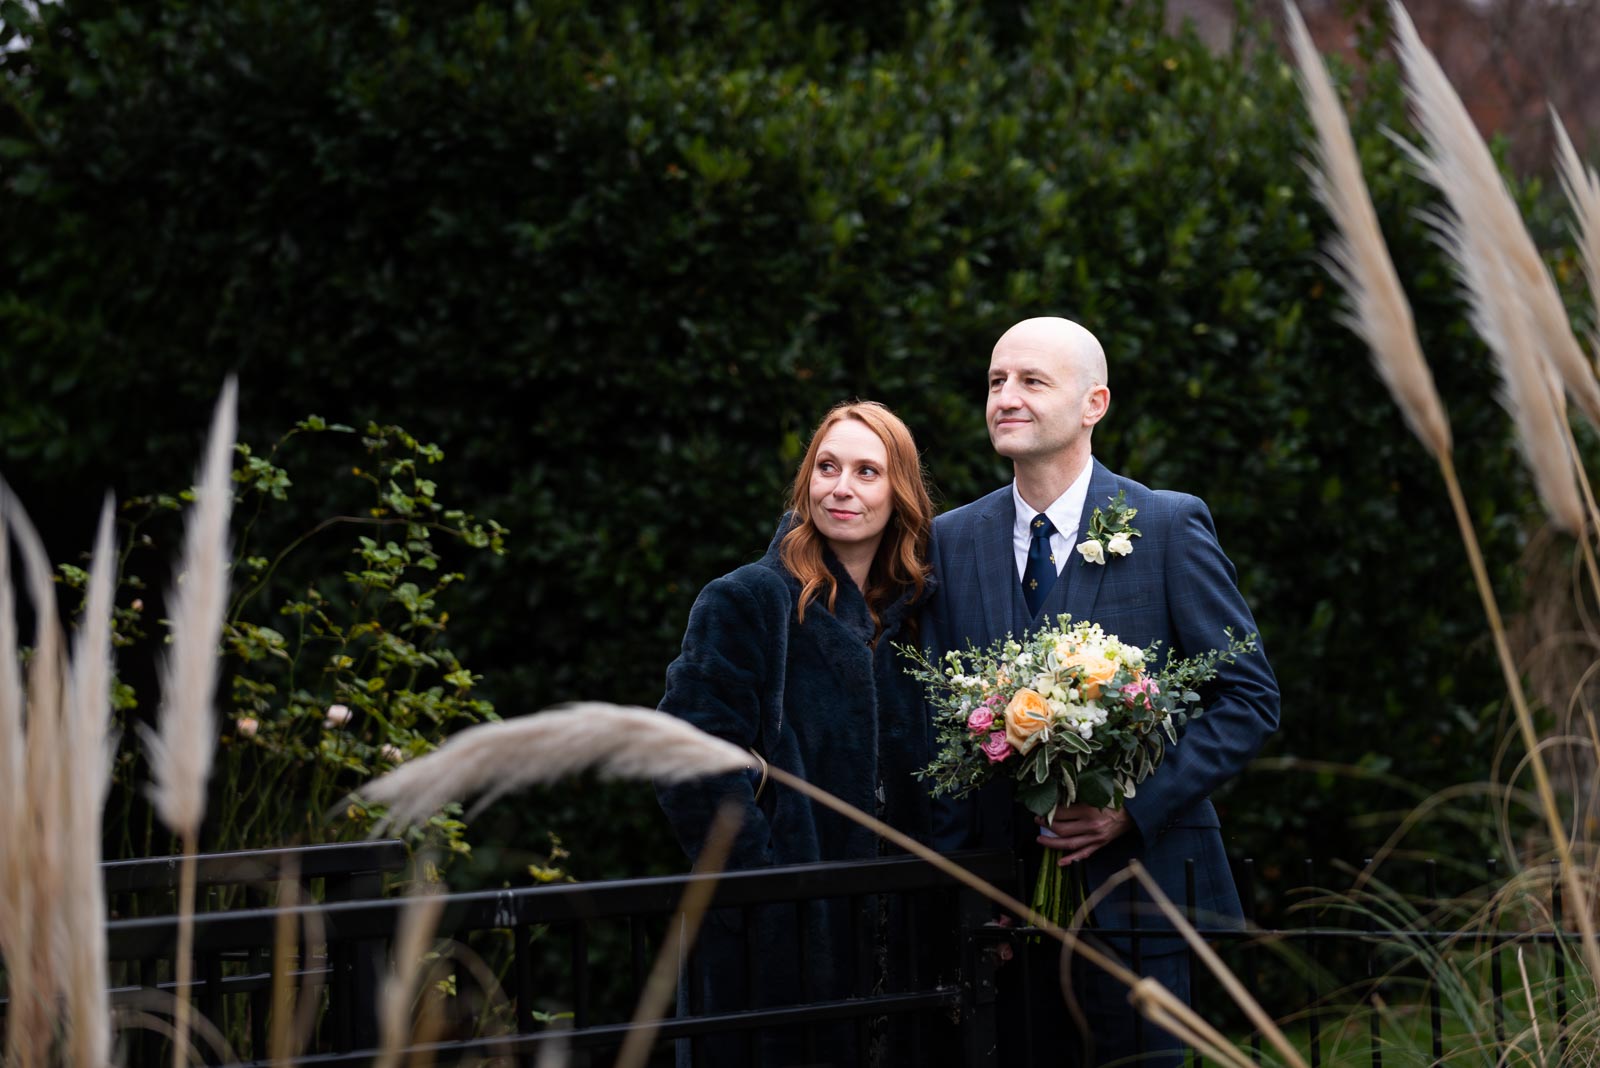 Melanie and Ryan smile through some tampa grass in Southover Grange after their wedding at Lewes Register Office.